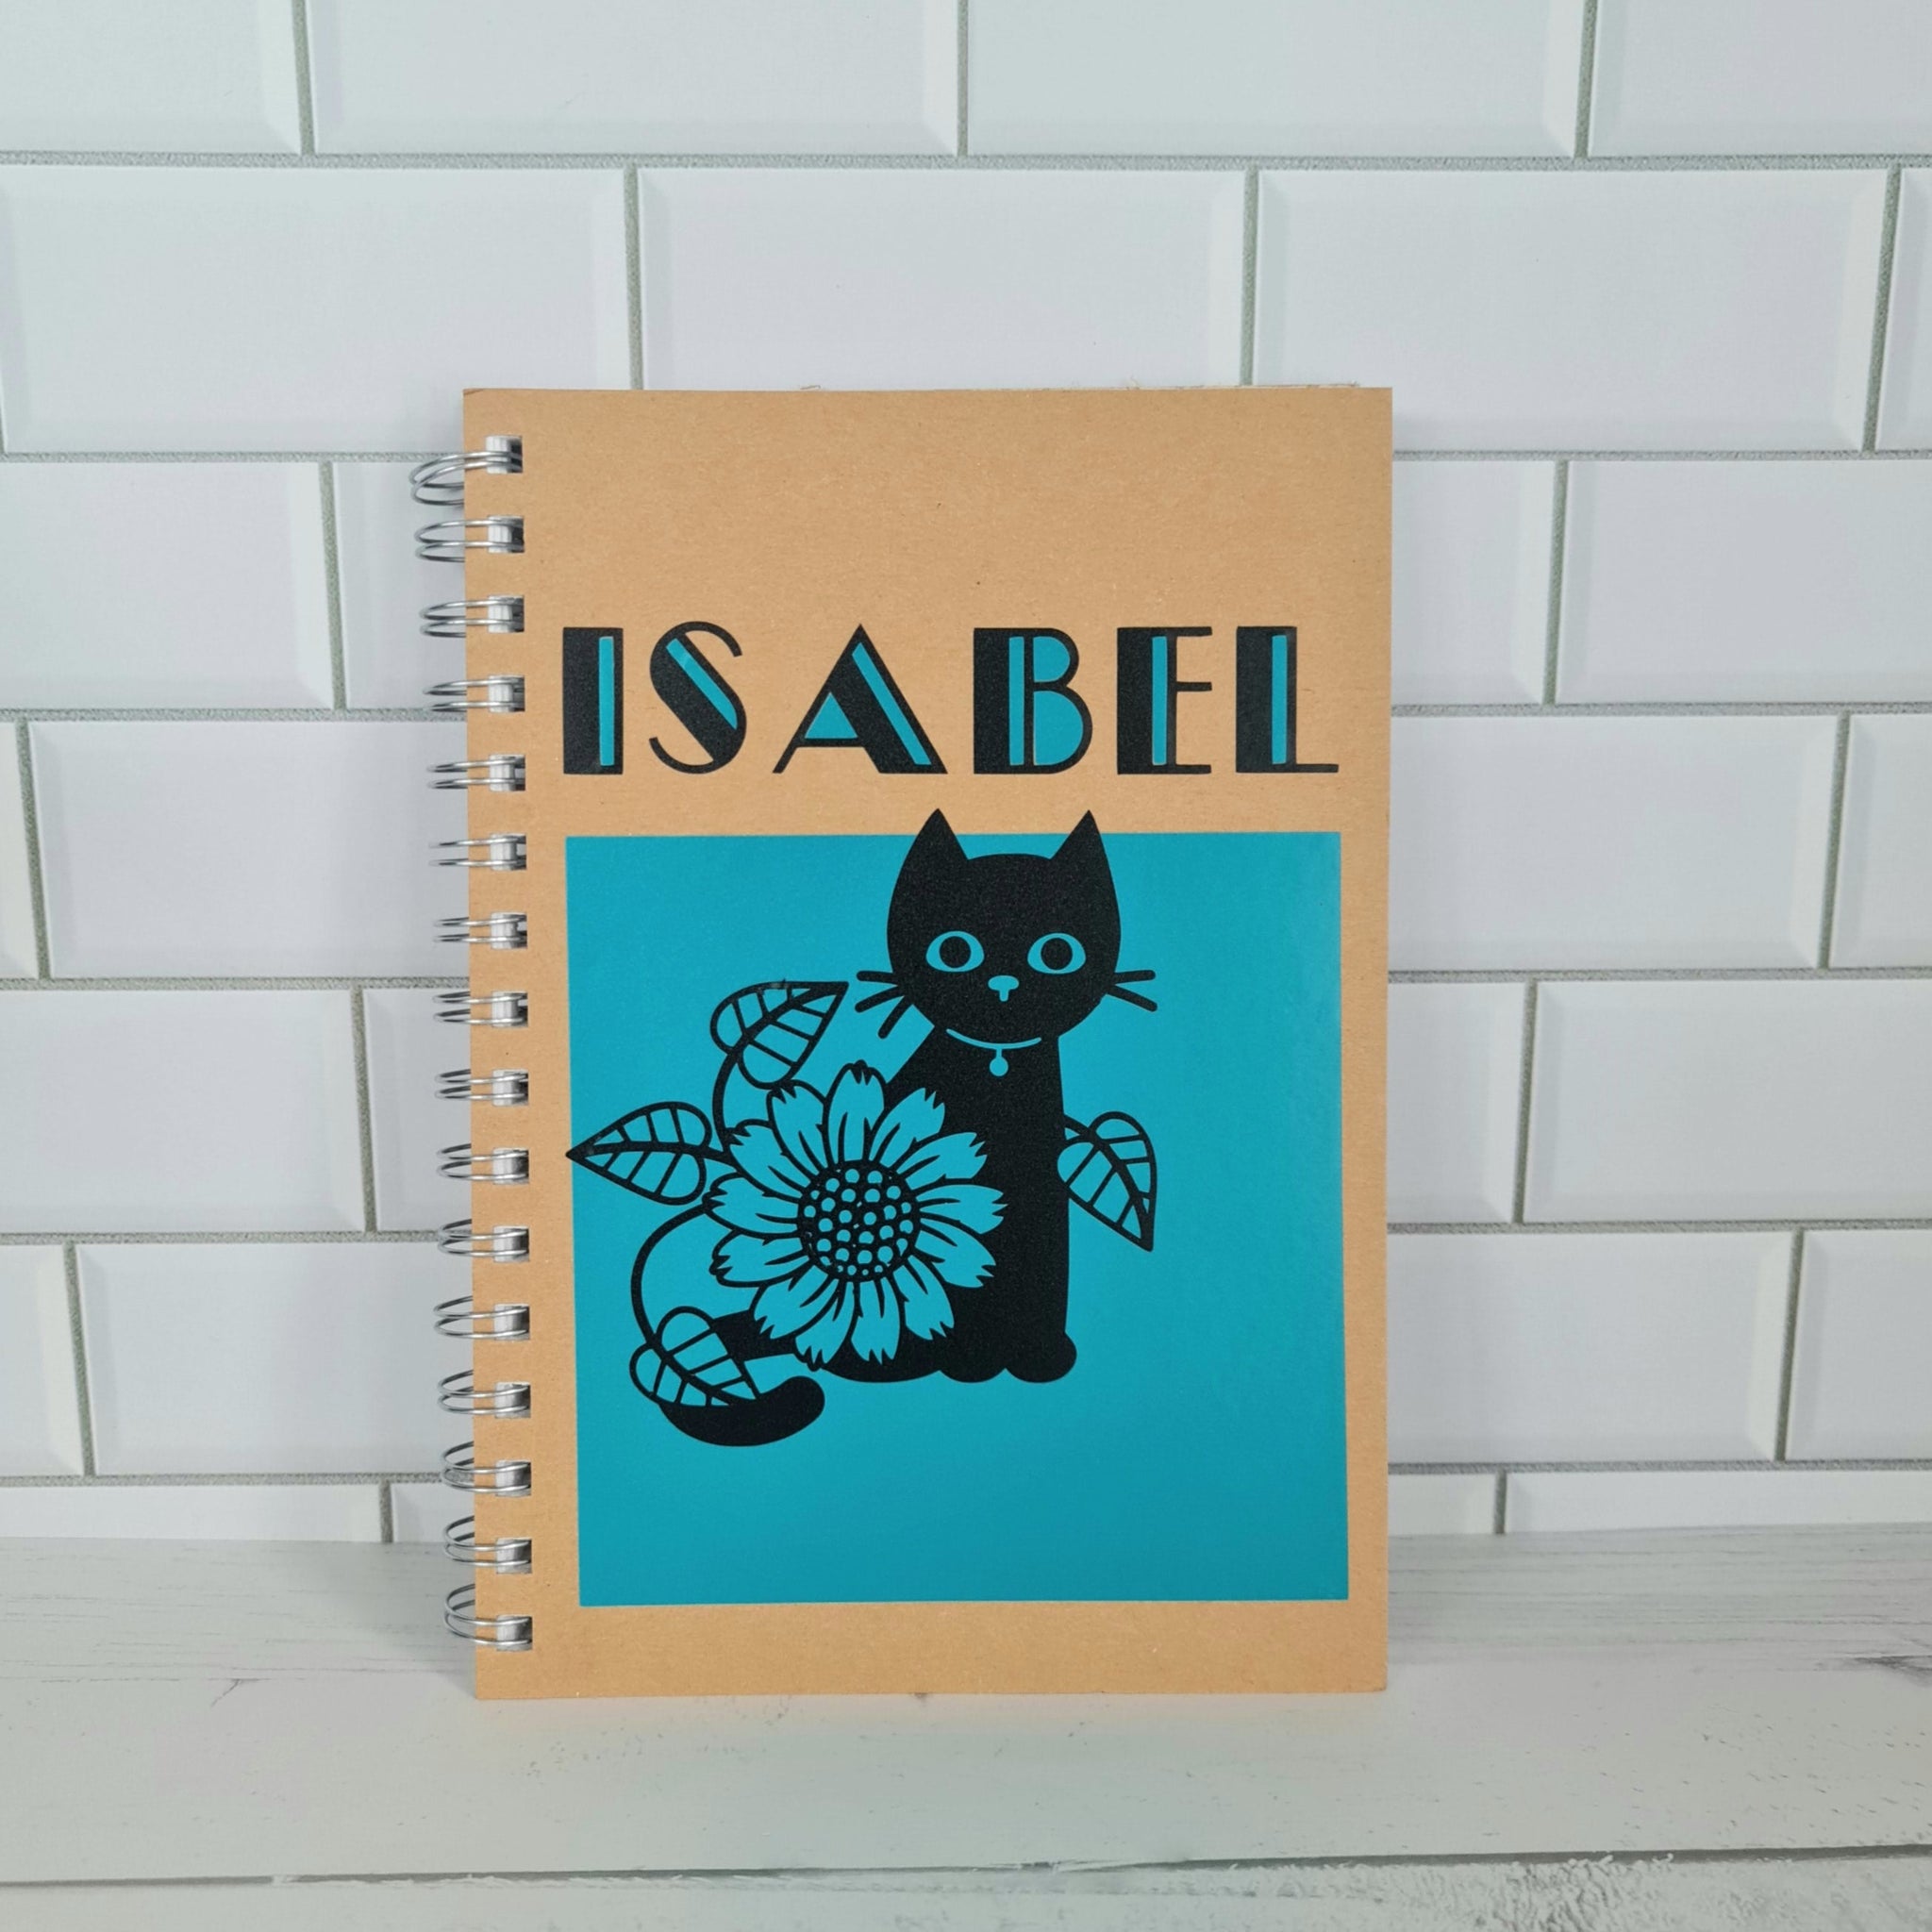 Personalised A5 Notebook